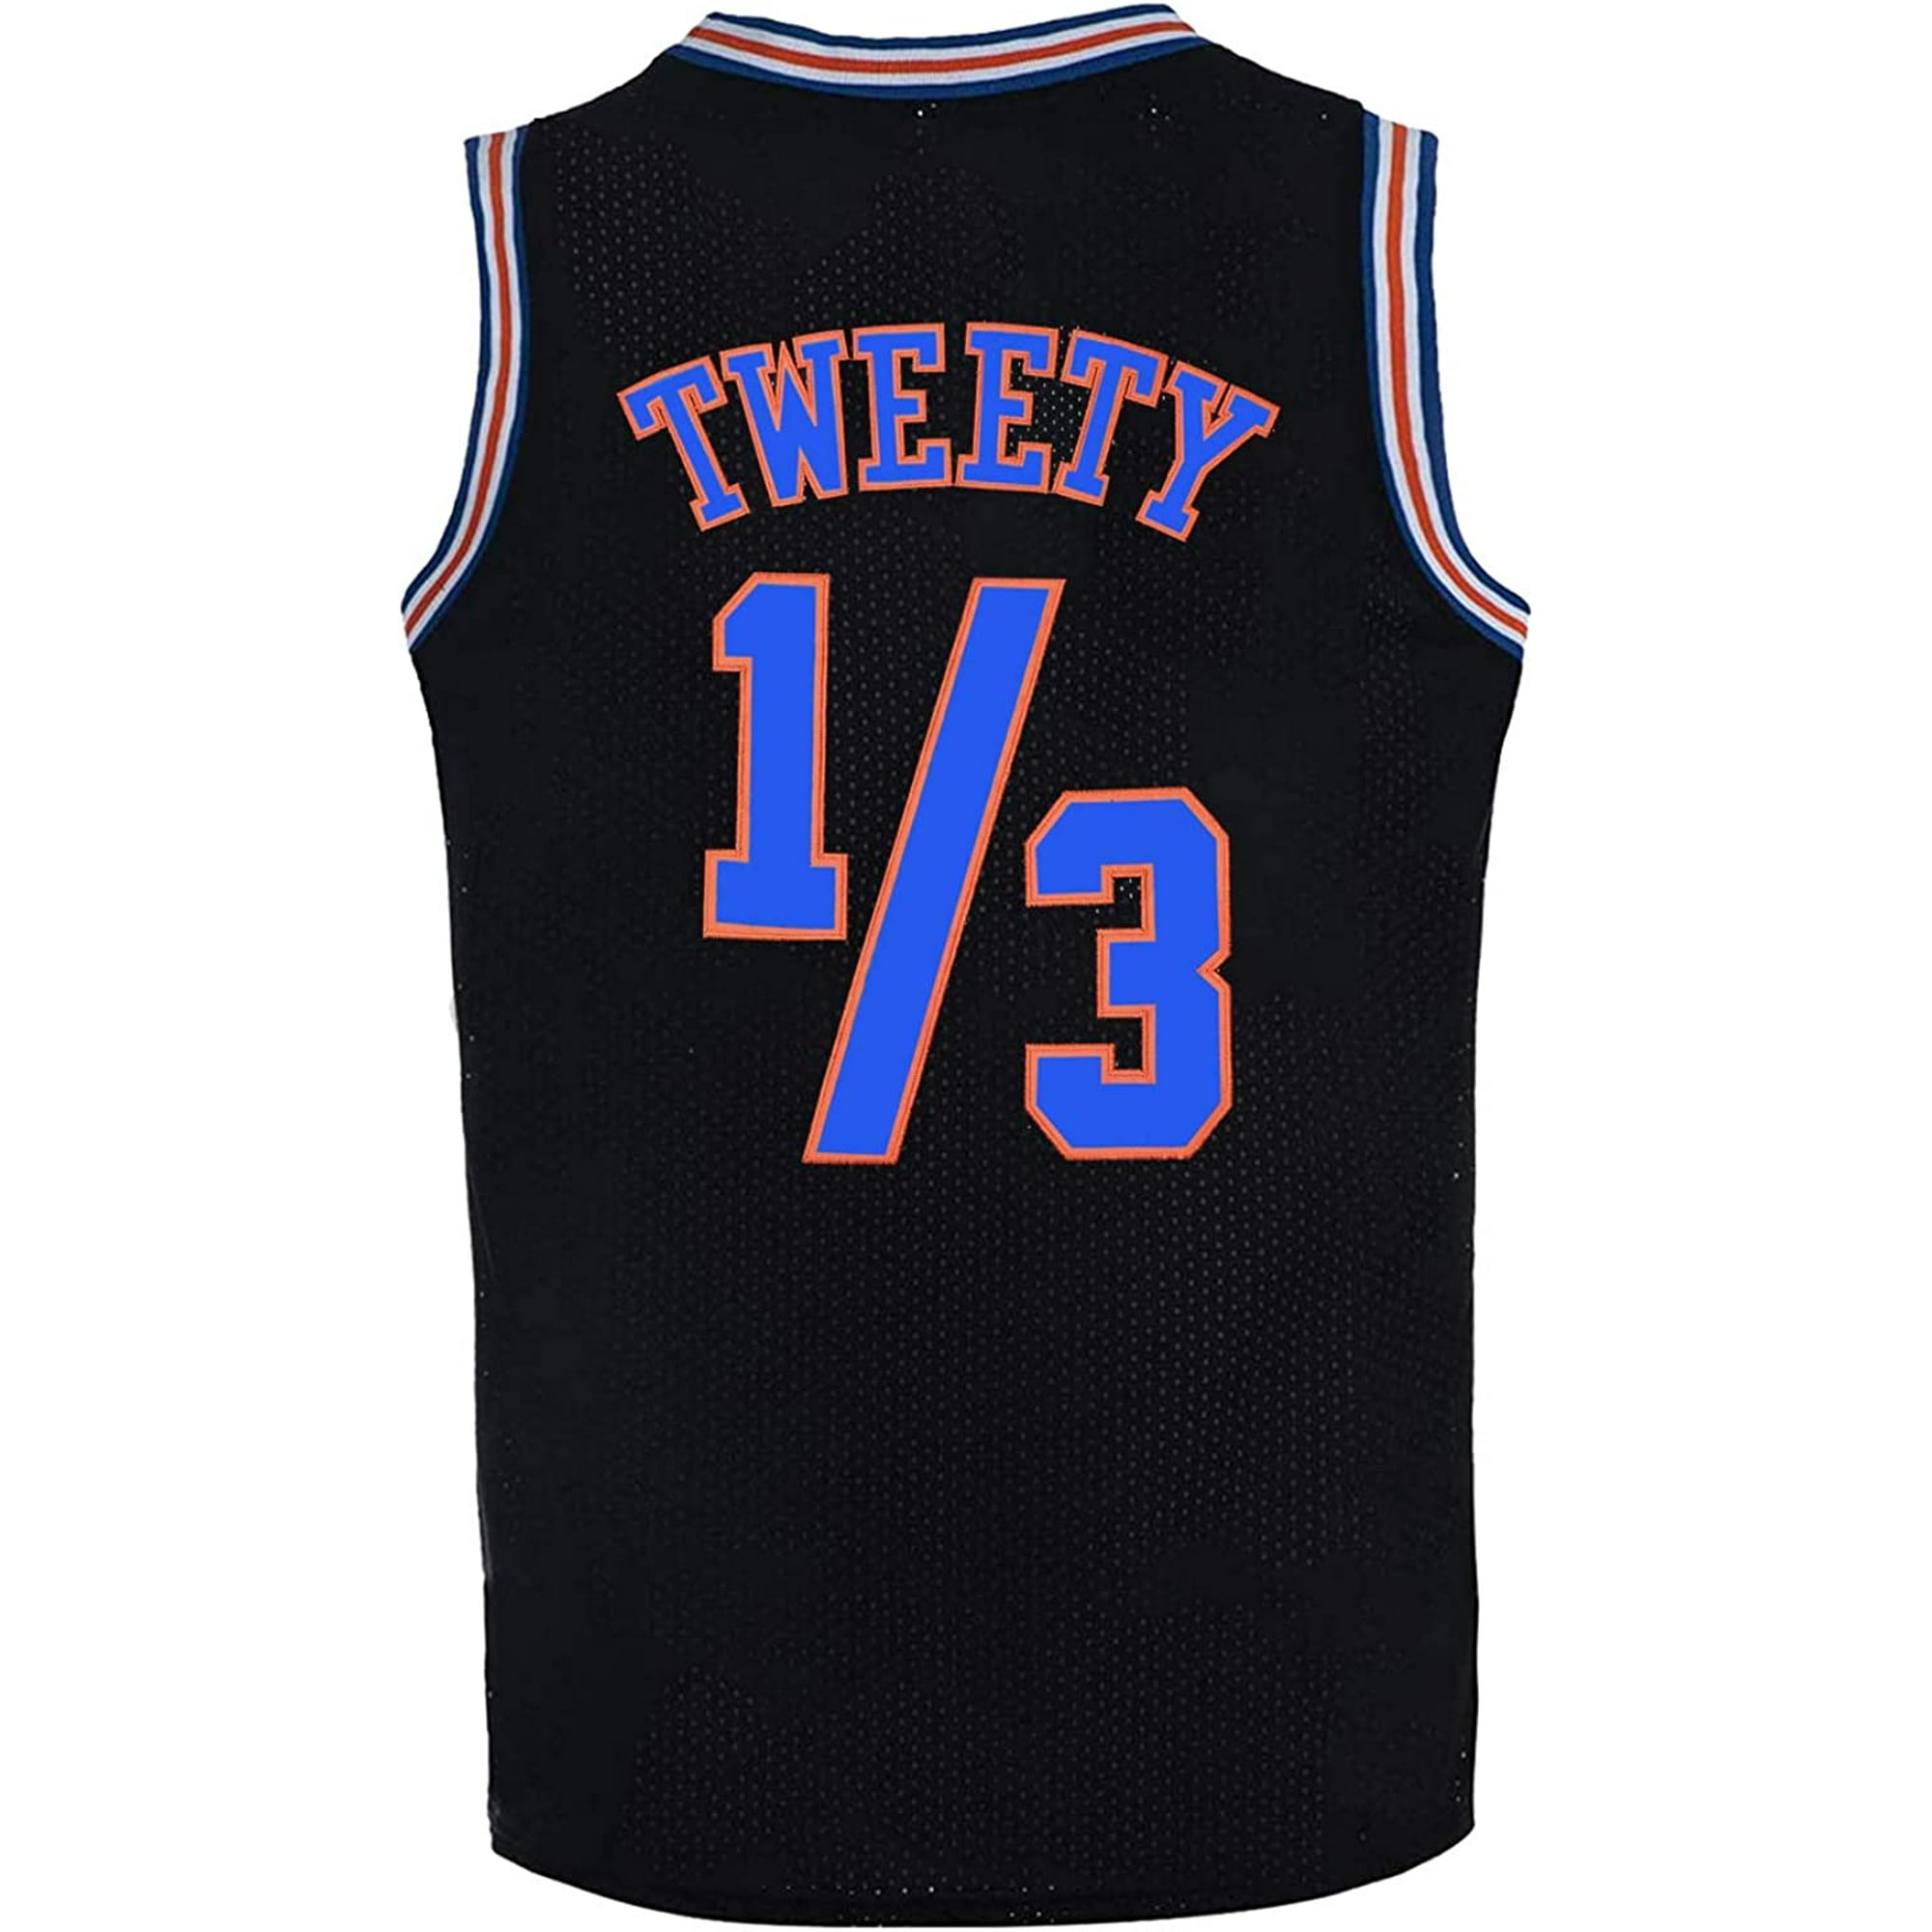 YOUI-GIFTS Mens Basketball Jersey 1/3 Tweety Space Jersey 90s Sports Shirts  Hiphop Party Clothing 